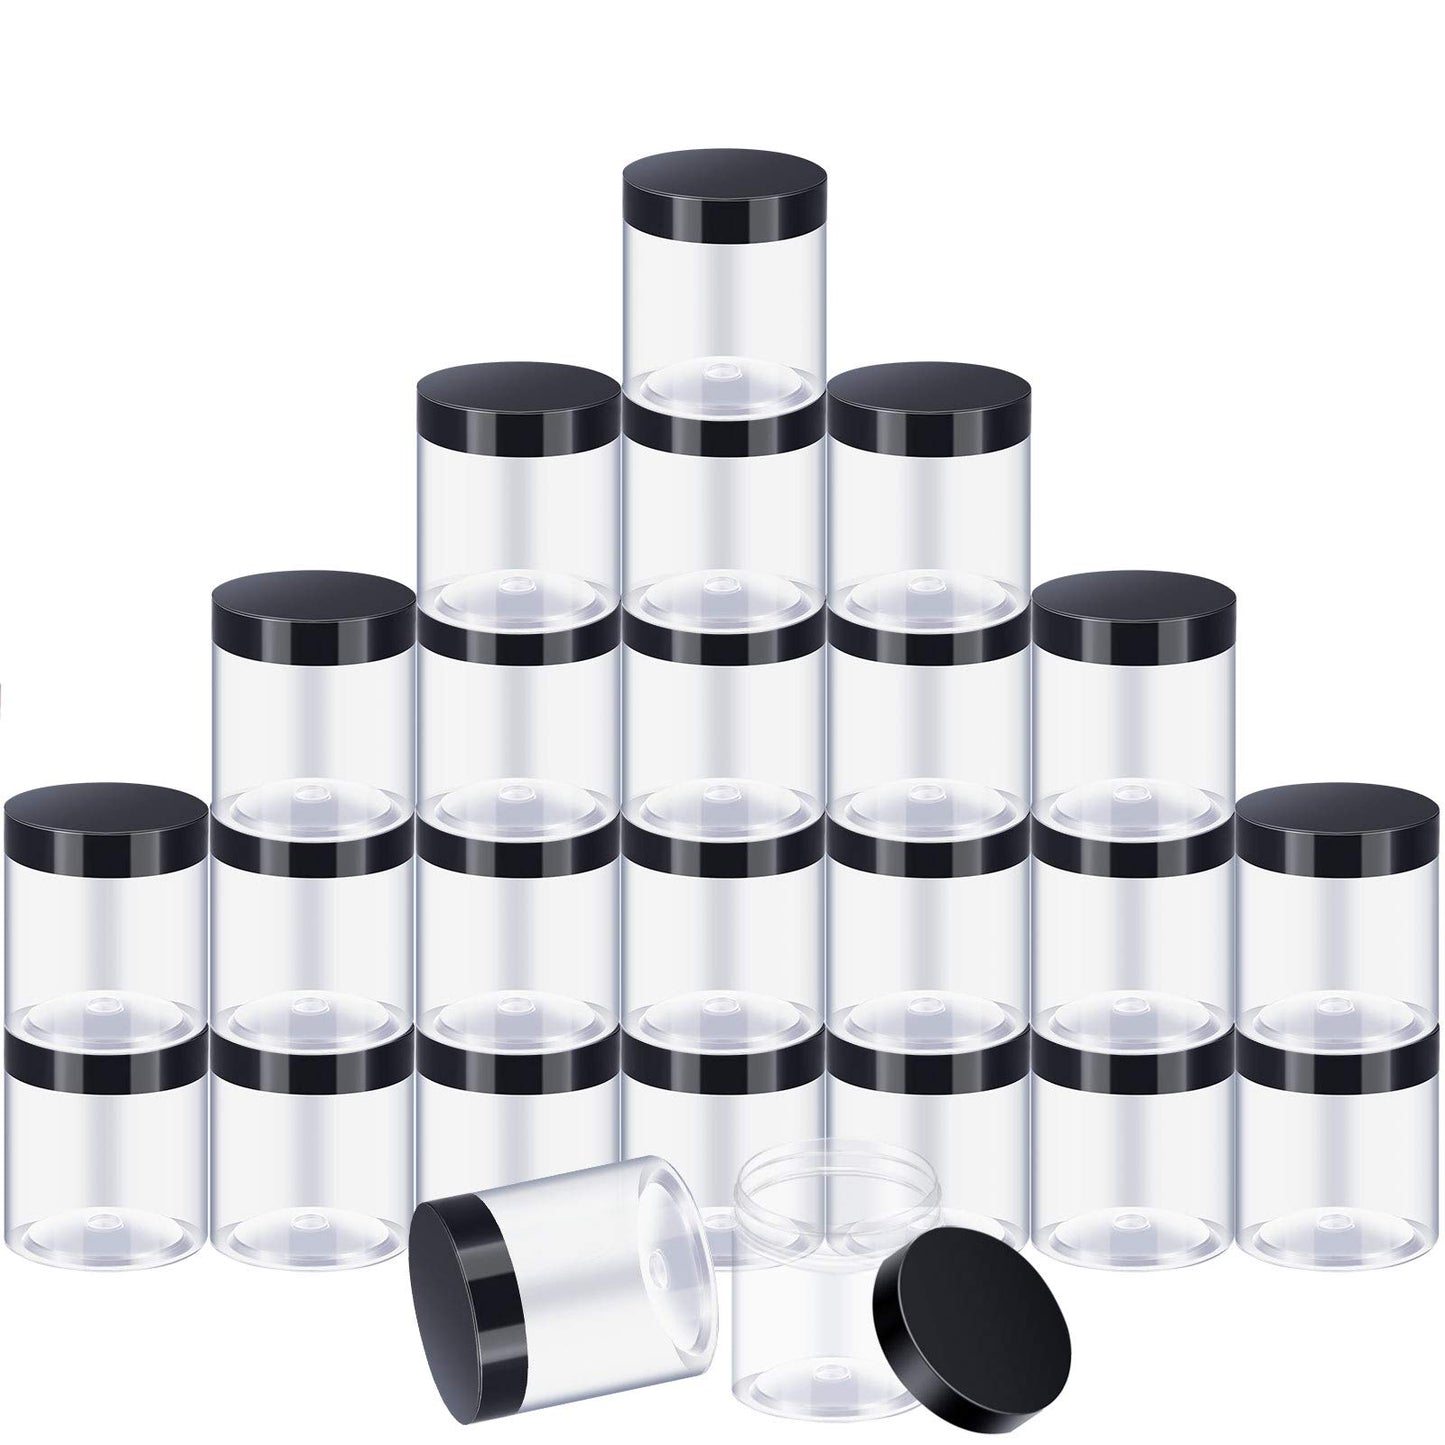 24 Pieces Empty Clear Plastic Jars with Lids Round Storage Containers Wide-Mouth for Beauty Product Cosmetic Cream Lotion Liquid Butter Craft and Food (Black Lid, 8 oz)